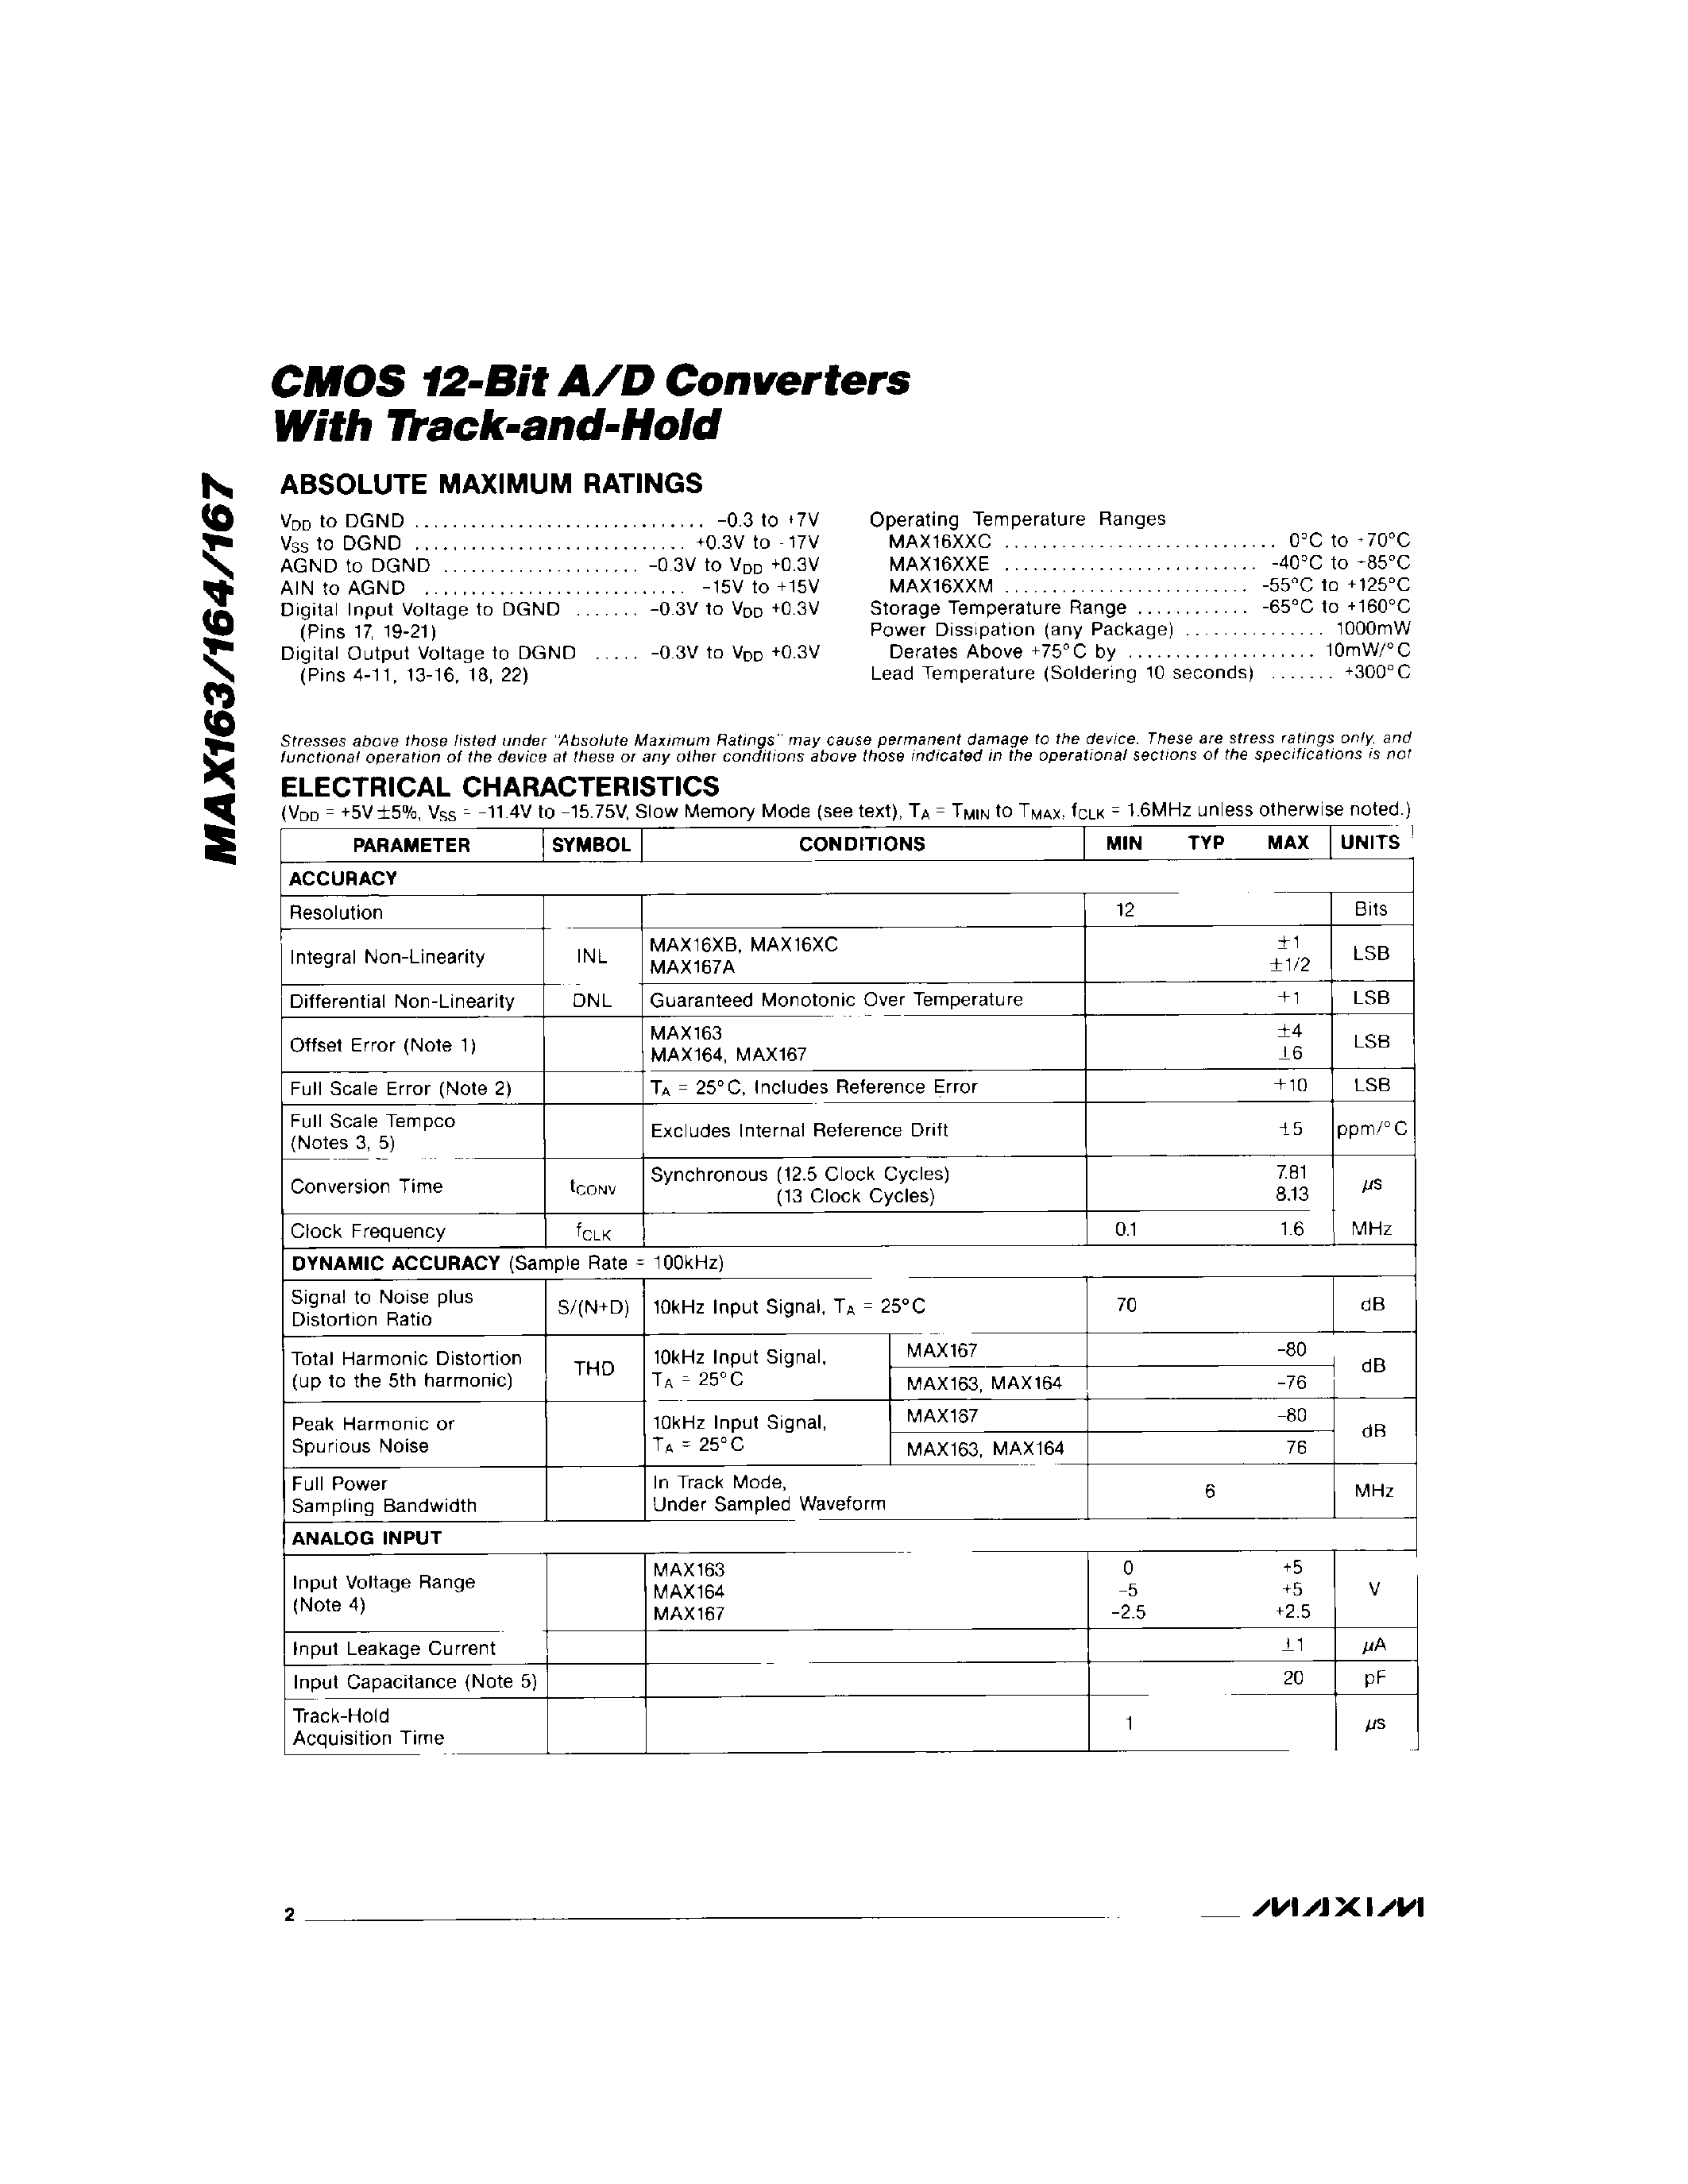 Datasheet MAX163CC/D - CMOS 12-Bit A/D Converters With Track-and-Hold page 2